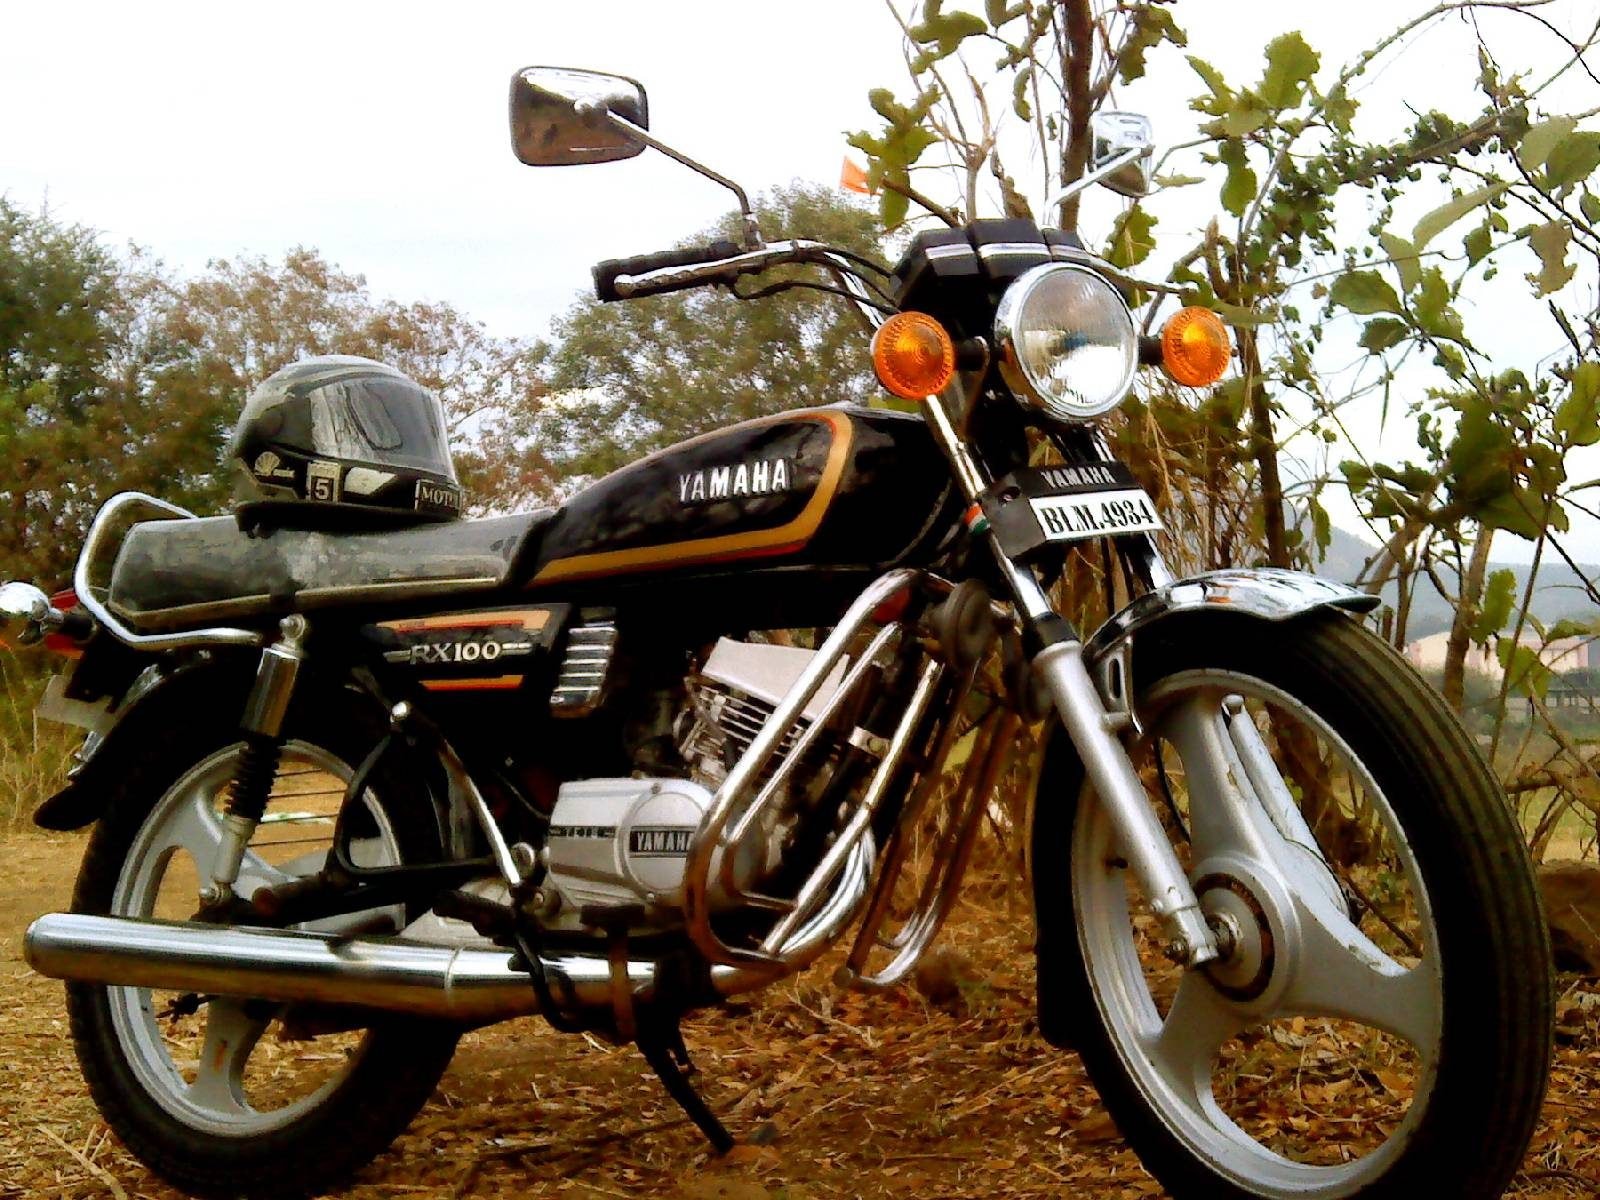 Yamaha Rx 100 All Set For Comeback In India With Bigger Engine All You Need To Know